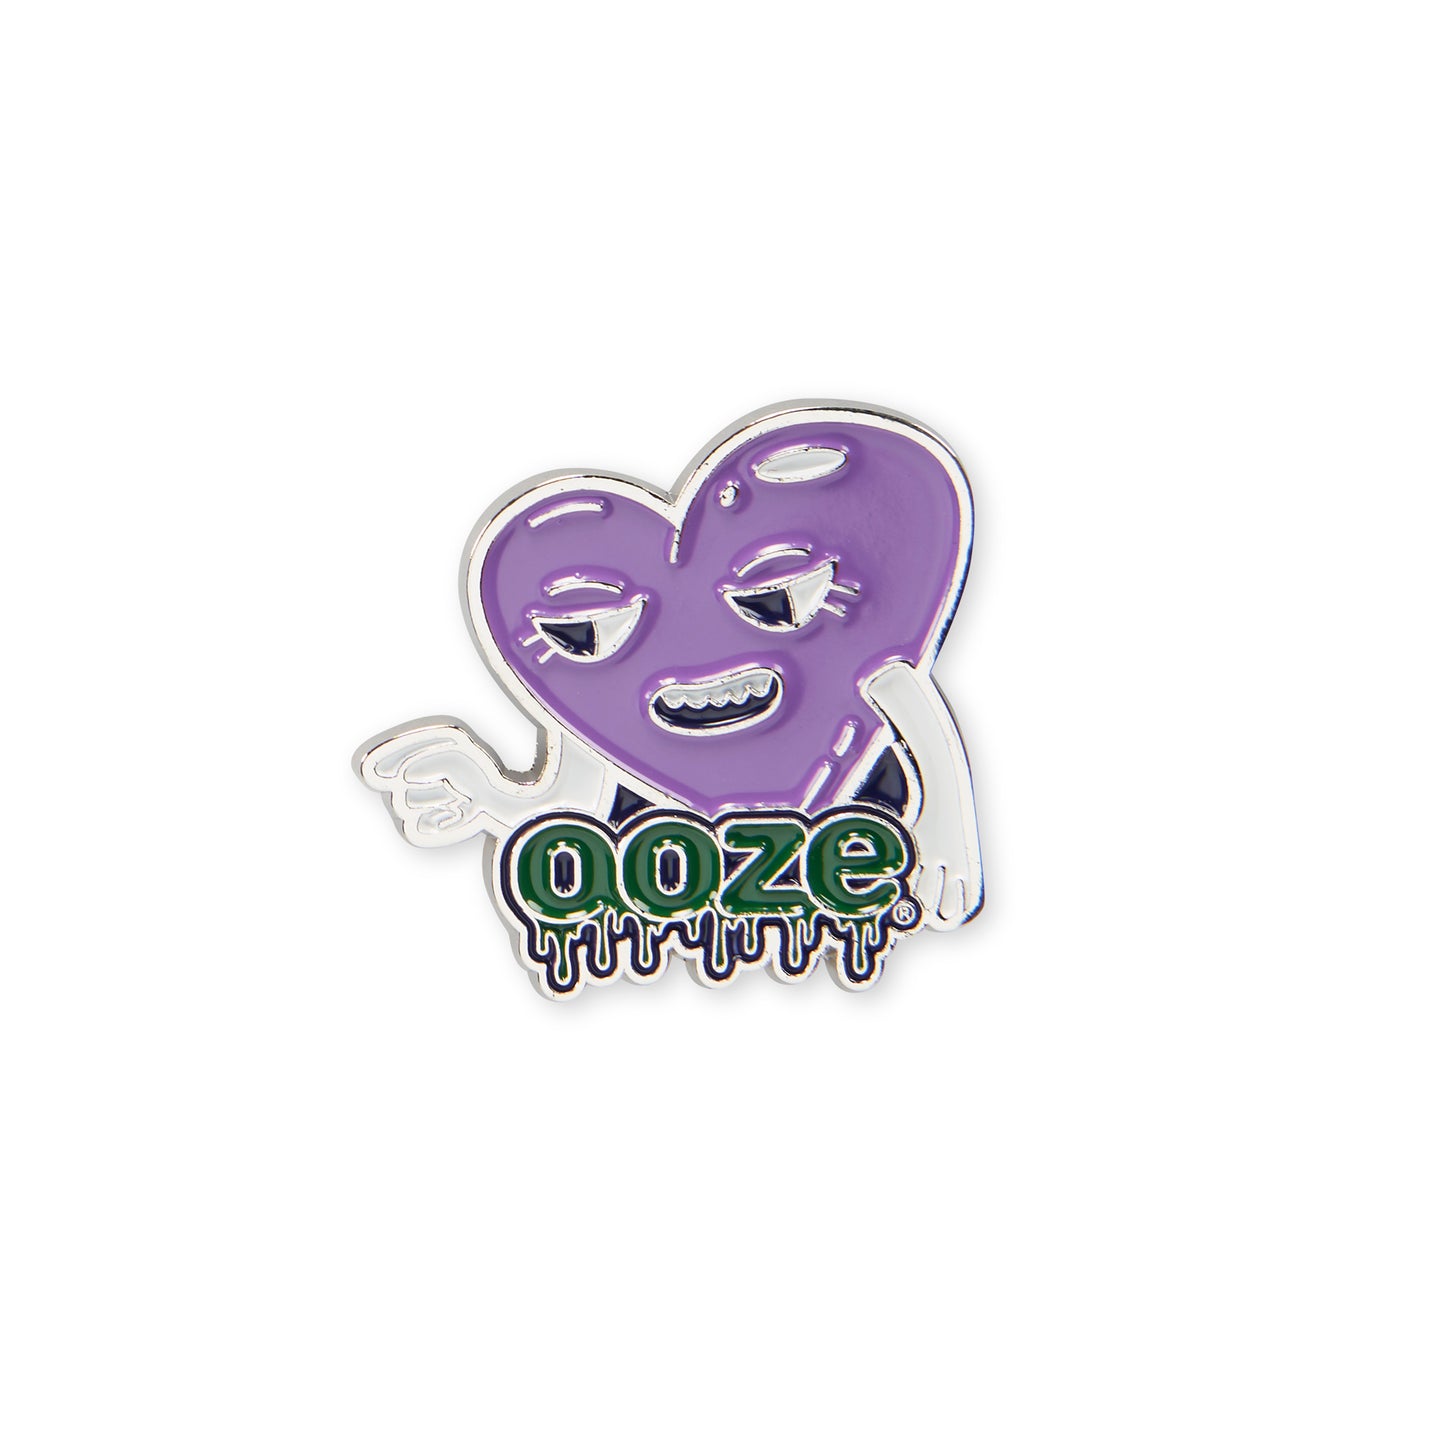 The Ooze Chroma Heart enamel pin has a purple heart with white arms and a face sitting on the Ooze logo